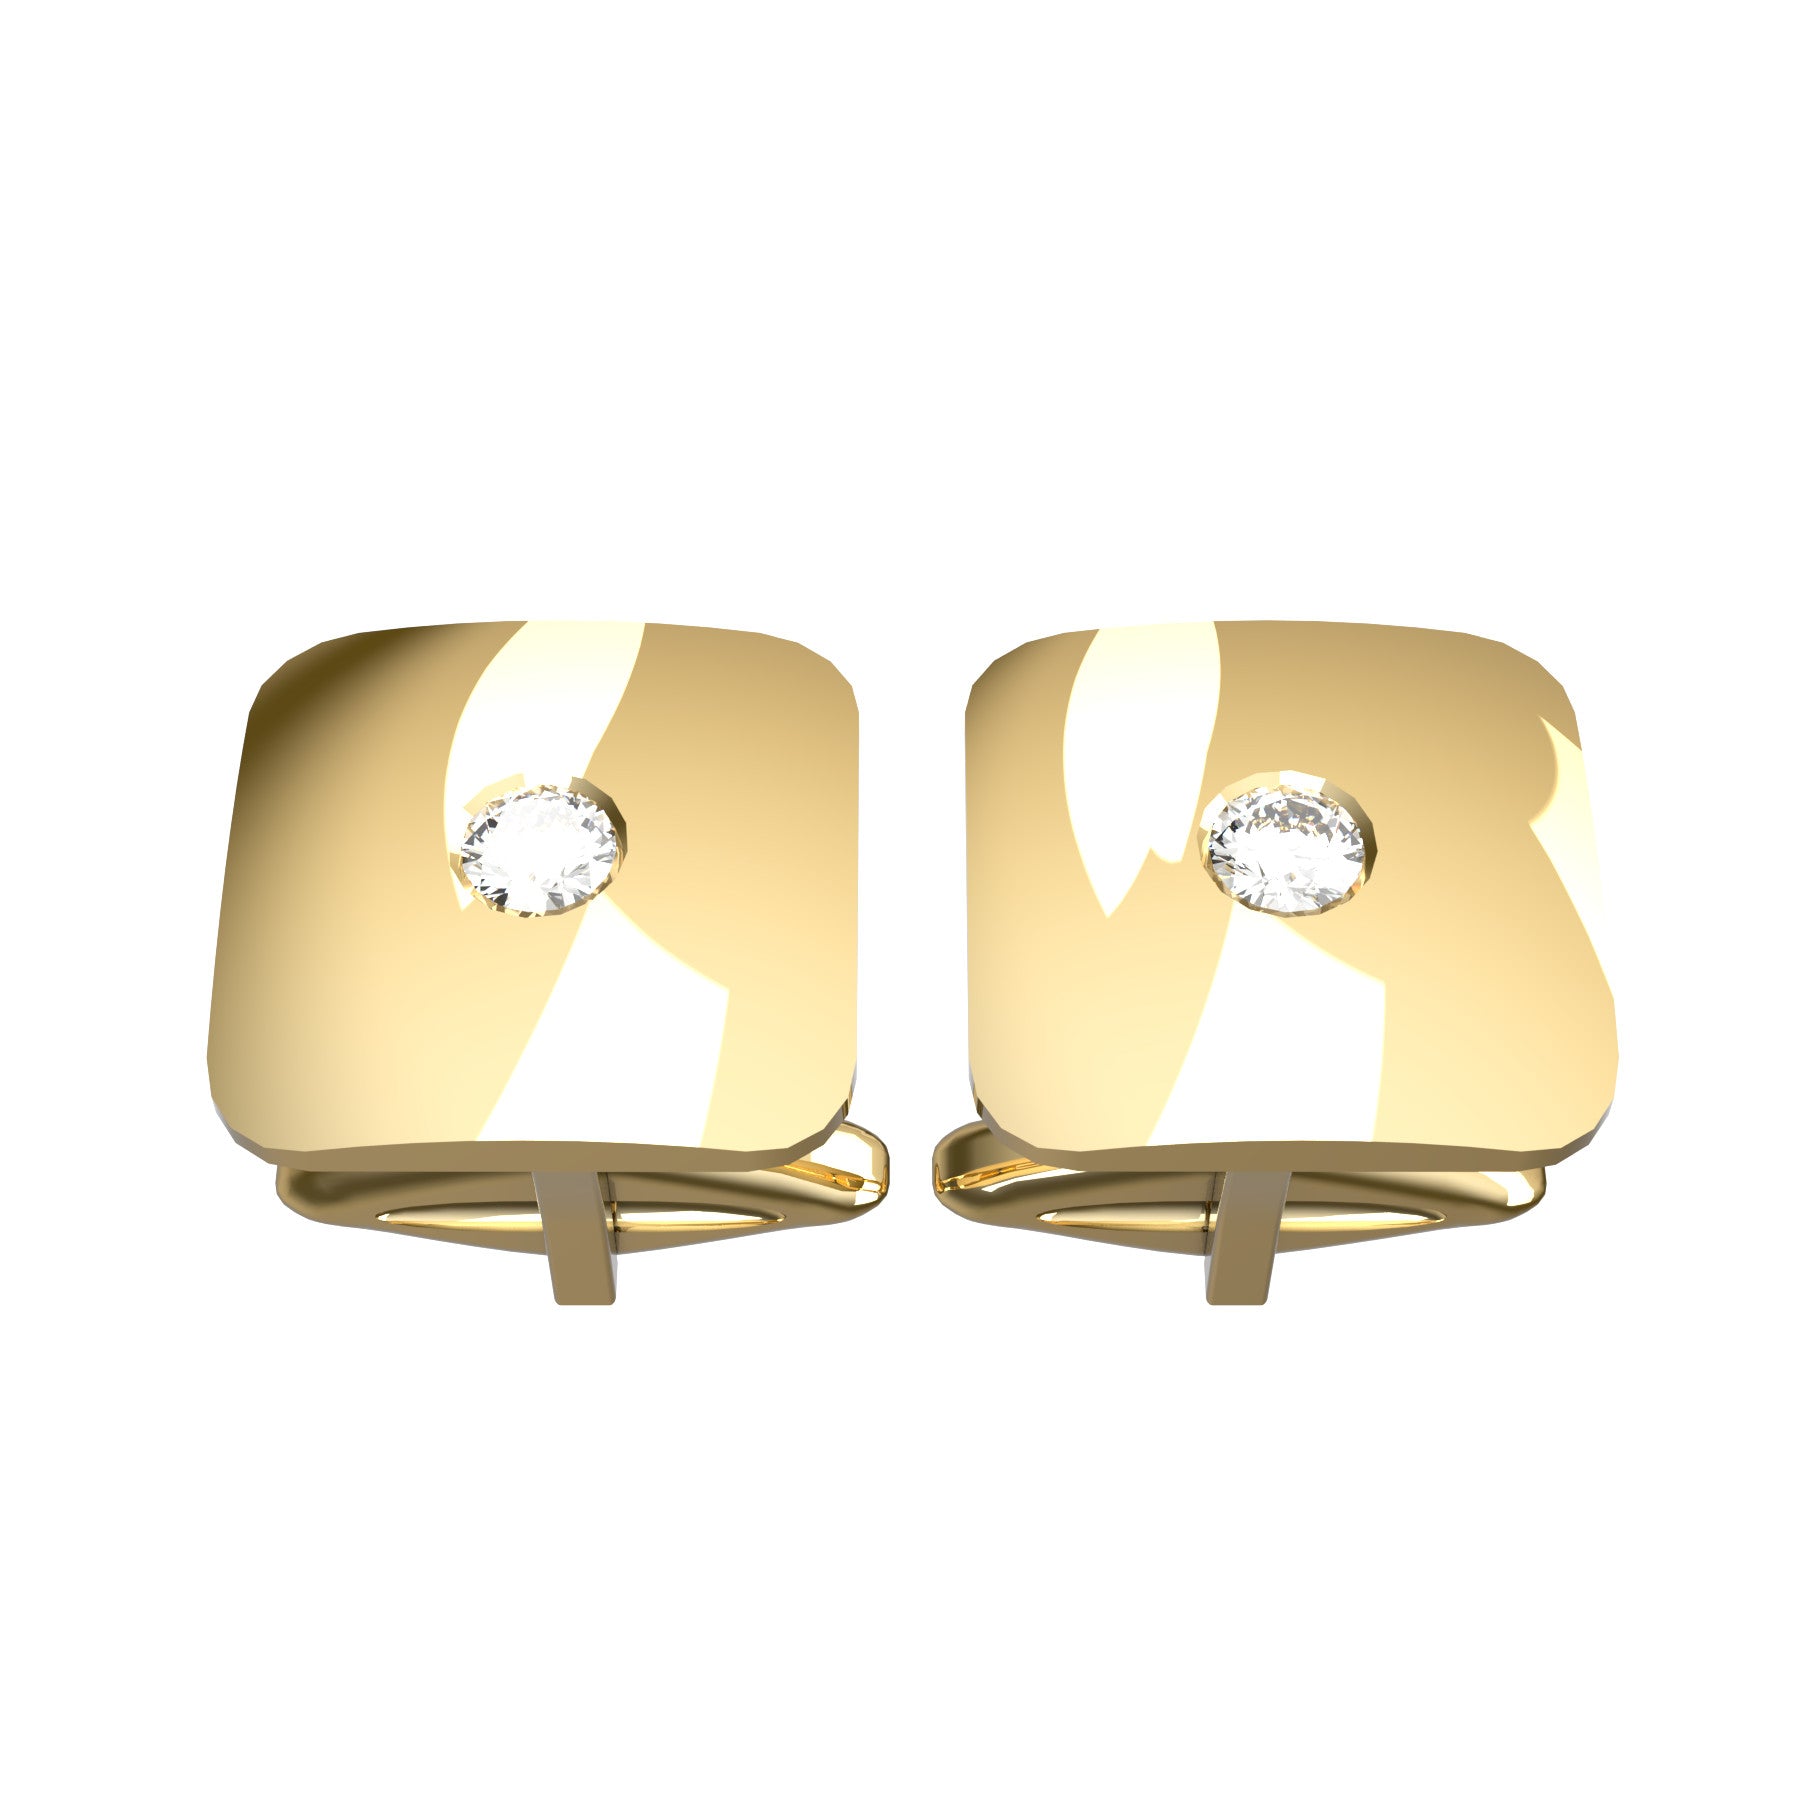 rounded square cufflinks, 18 K yellow gold, round natural diamonds, weight about 14,1 g. (0.50 oz), size 15x15x2,5 mm